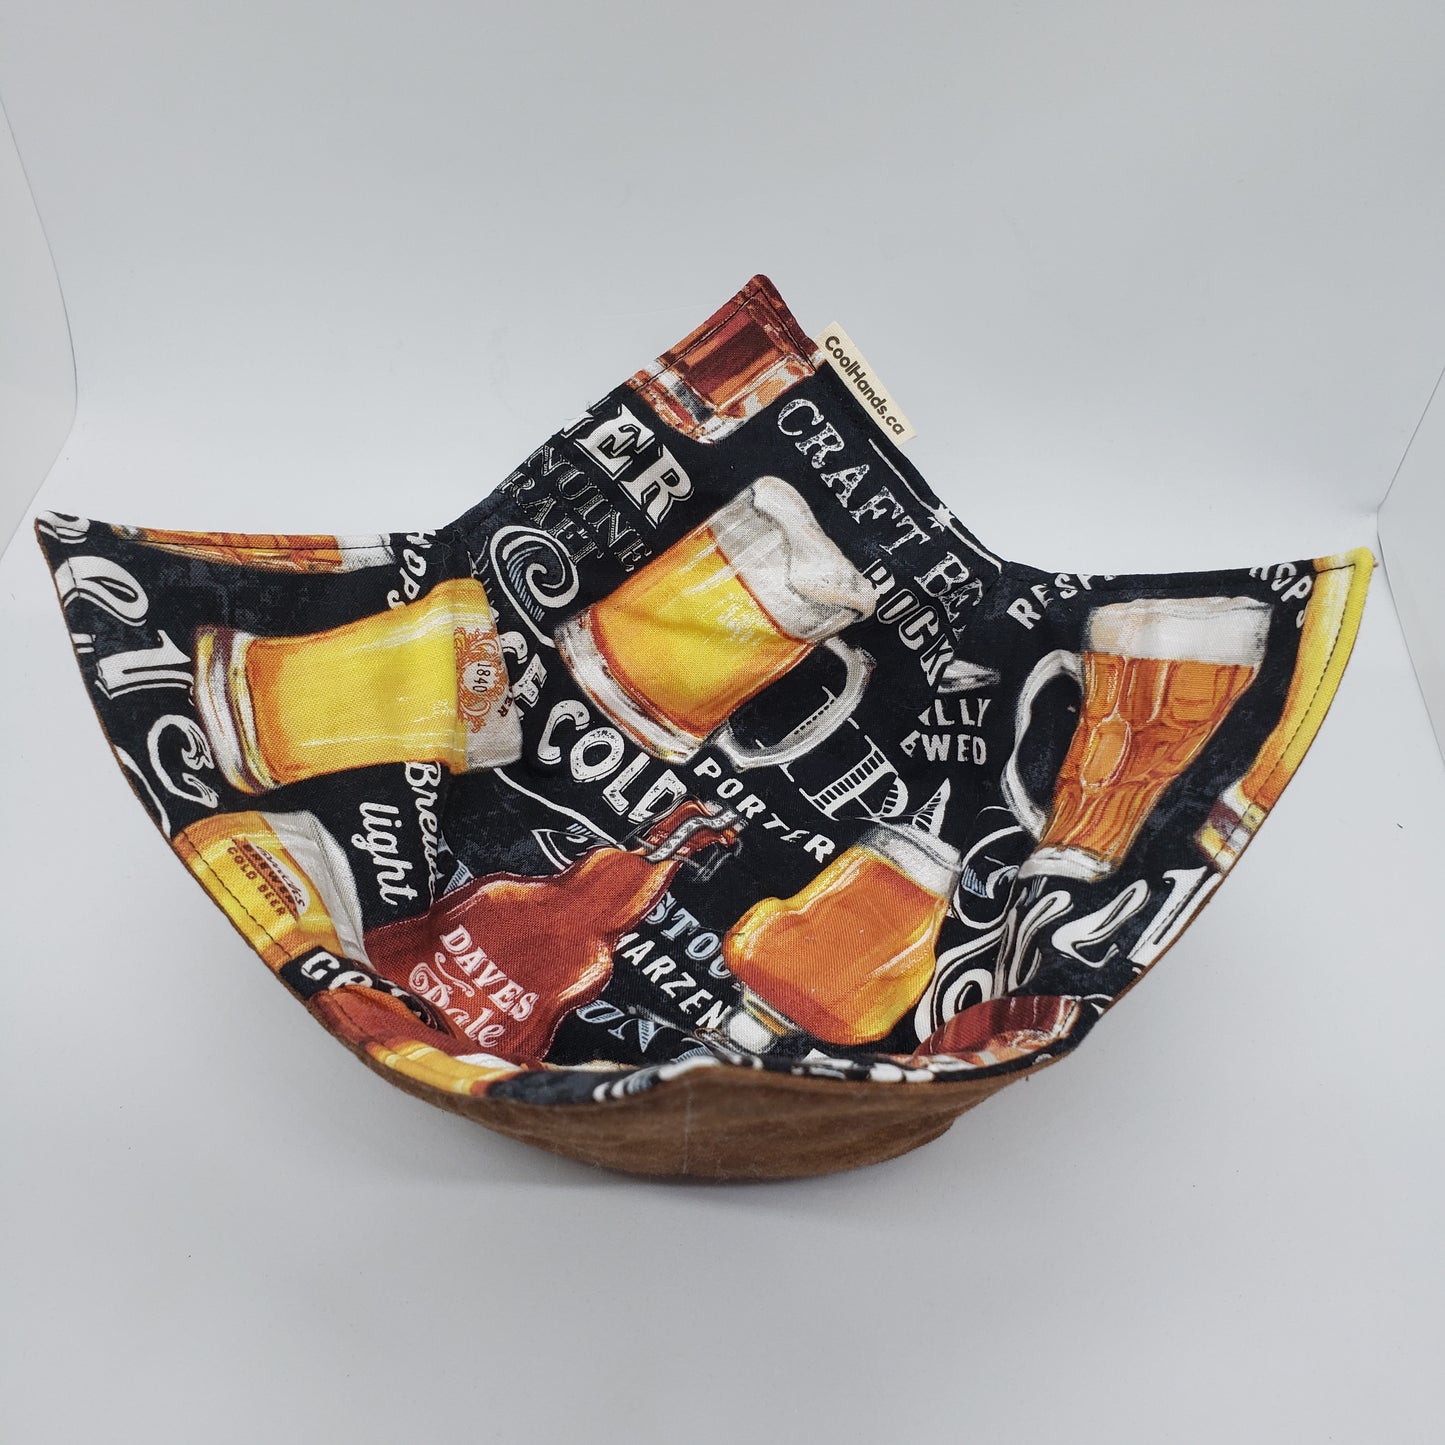 100% Cotton Microwavable Bowl Cozy - Something's Brewing